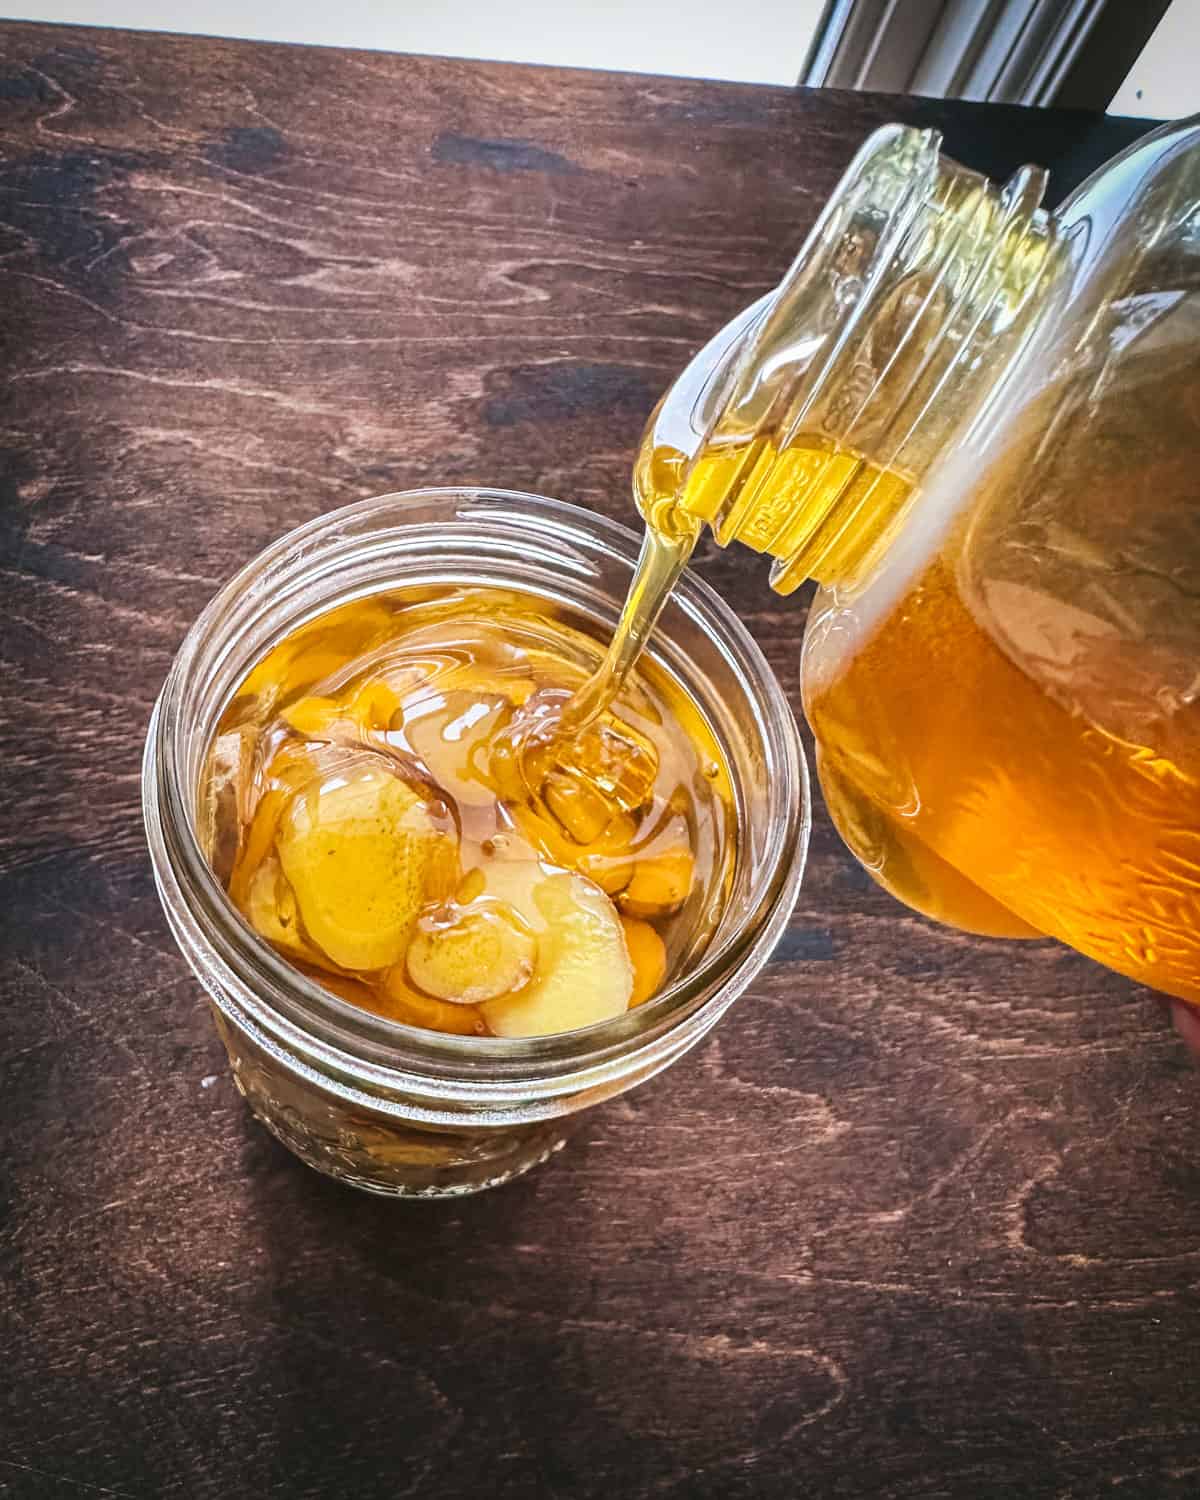 Honey pouring from a honey bear into an open jar of sliced ginger on dark wood surface, top view.